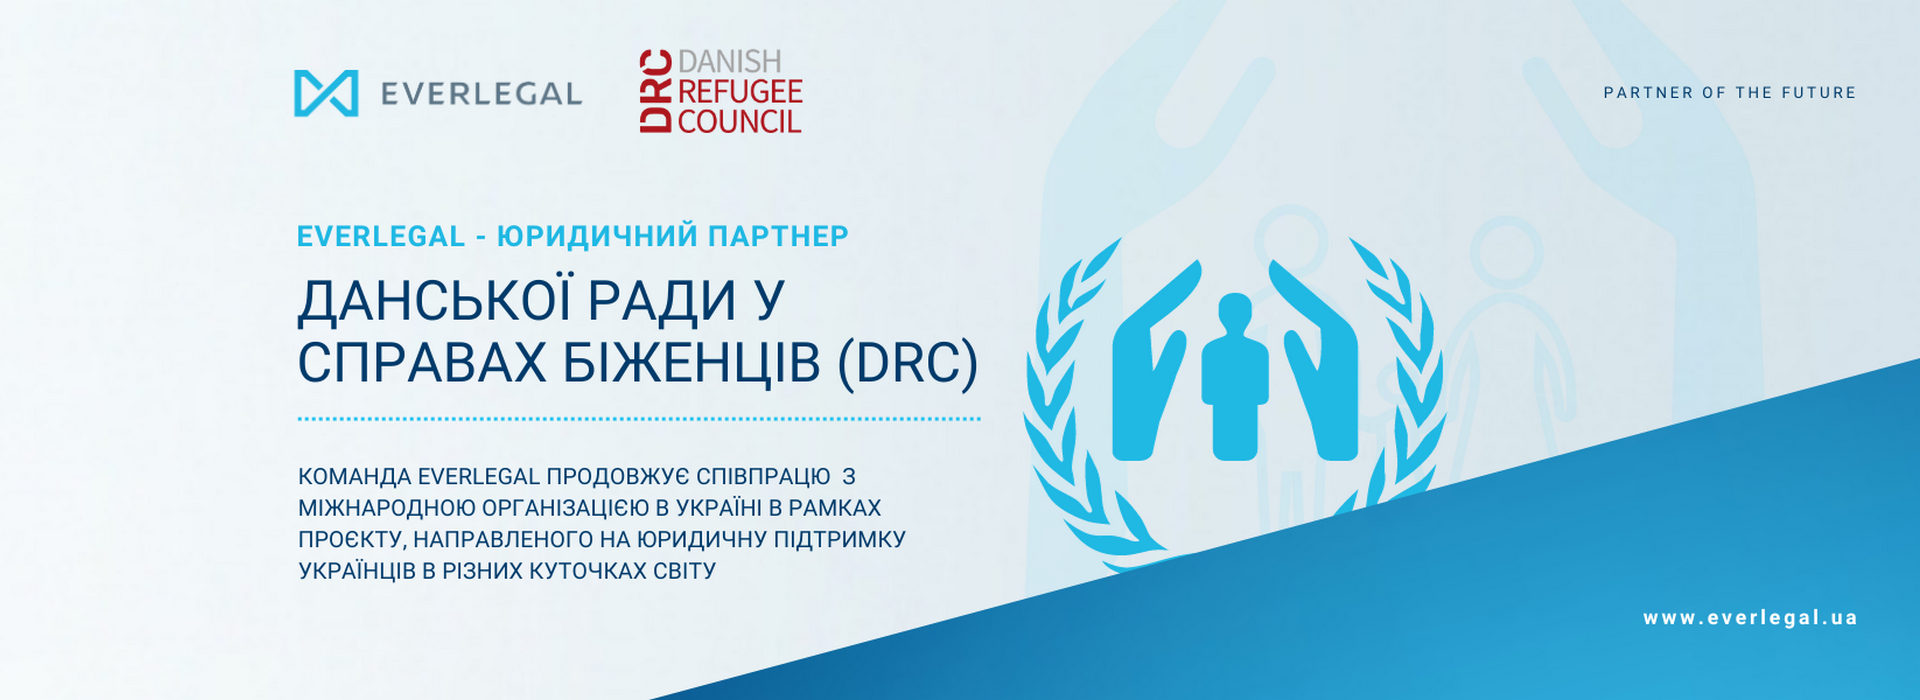 EVERLEGAL Team Continues Cooperation with the Danish Refugee Council (DRC) within the Framework of the Project Aimed at Providing Legal Support to Ukrainians Around the World